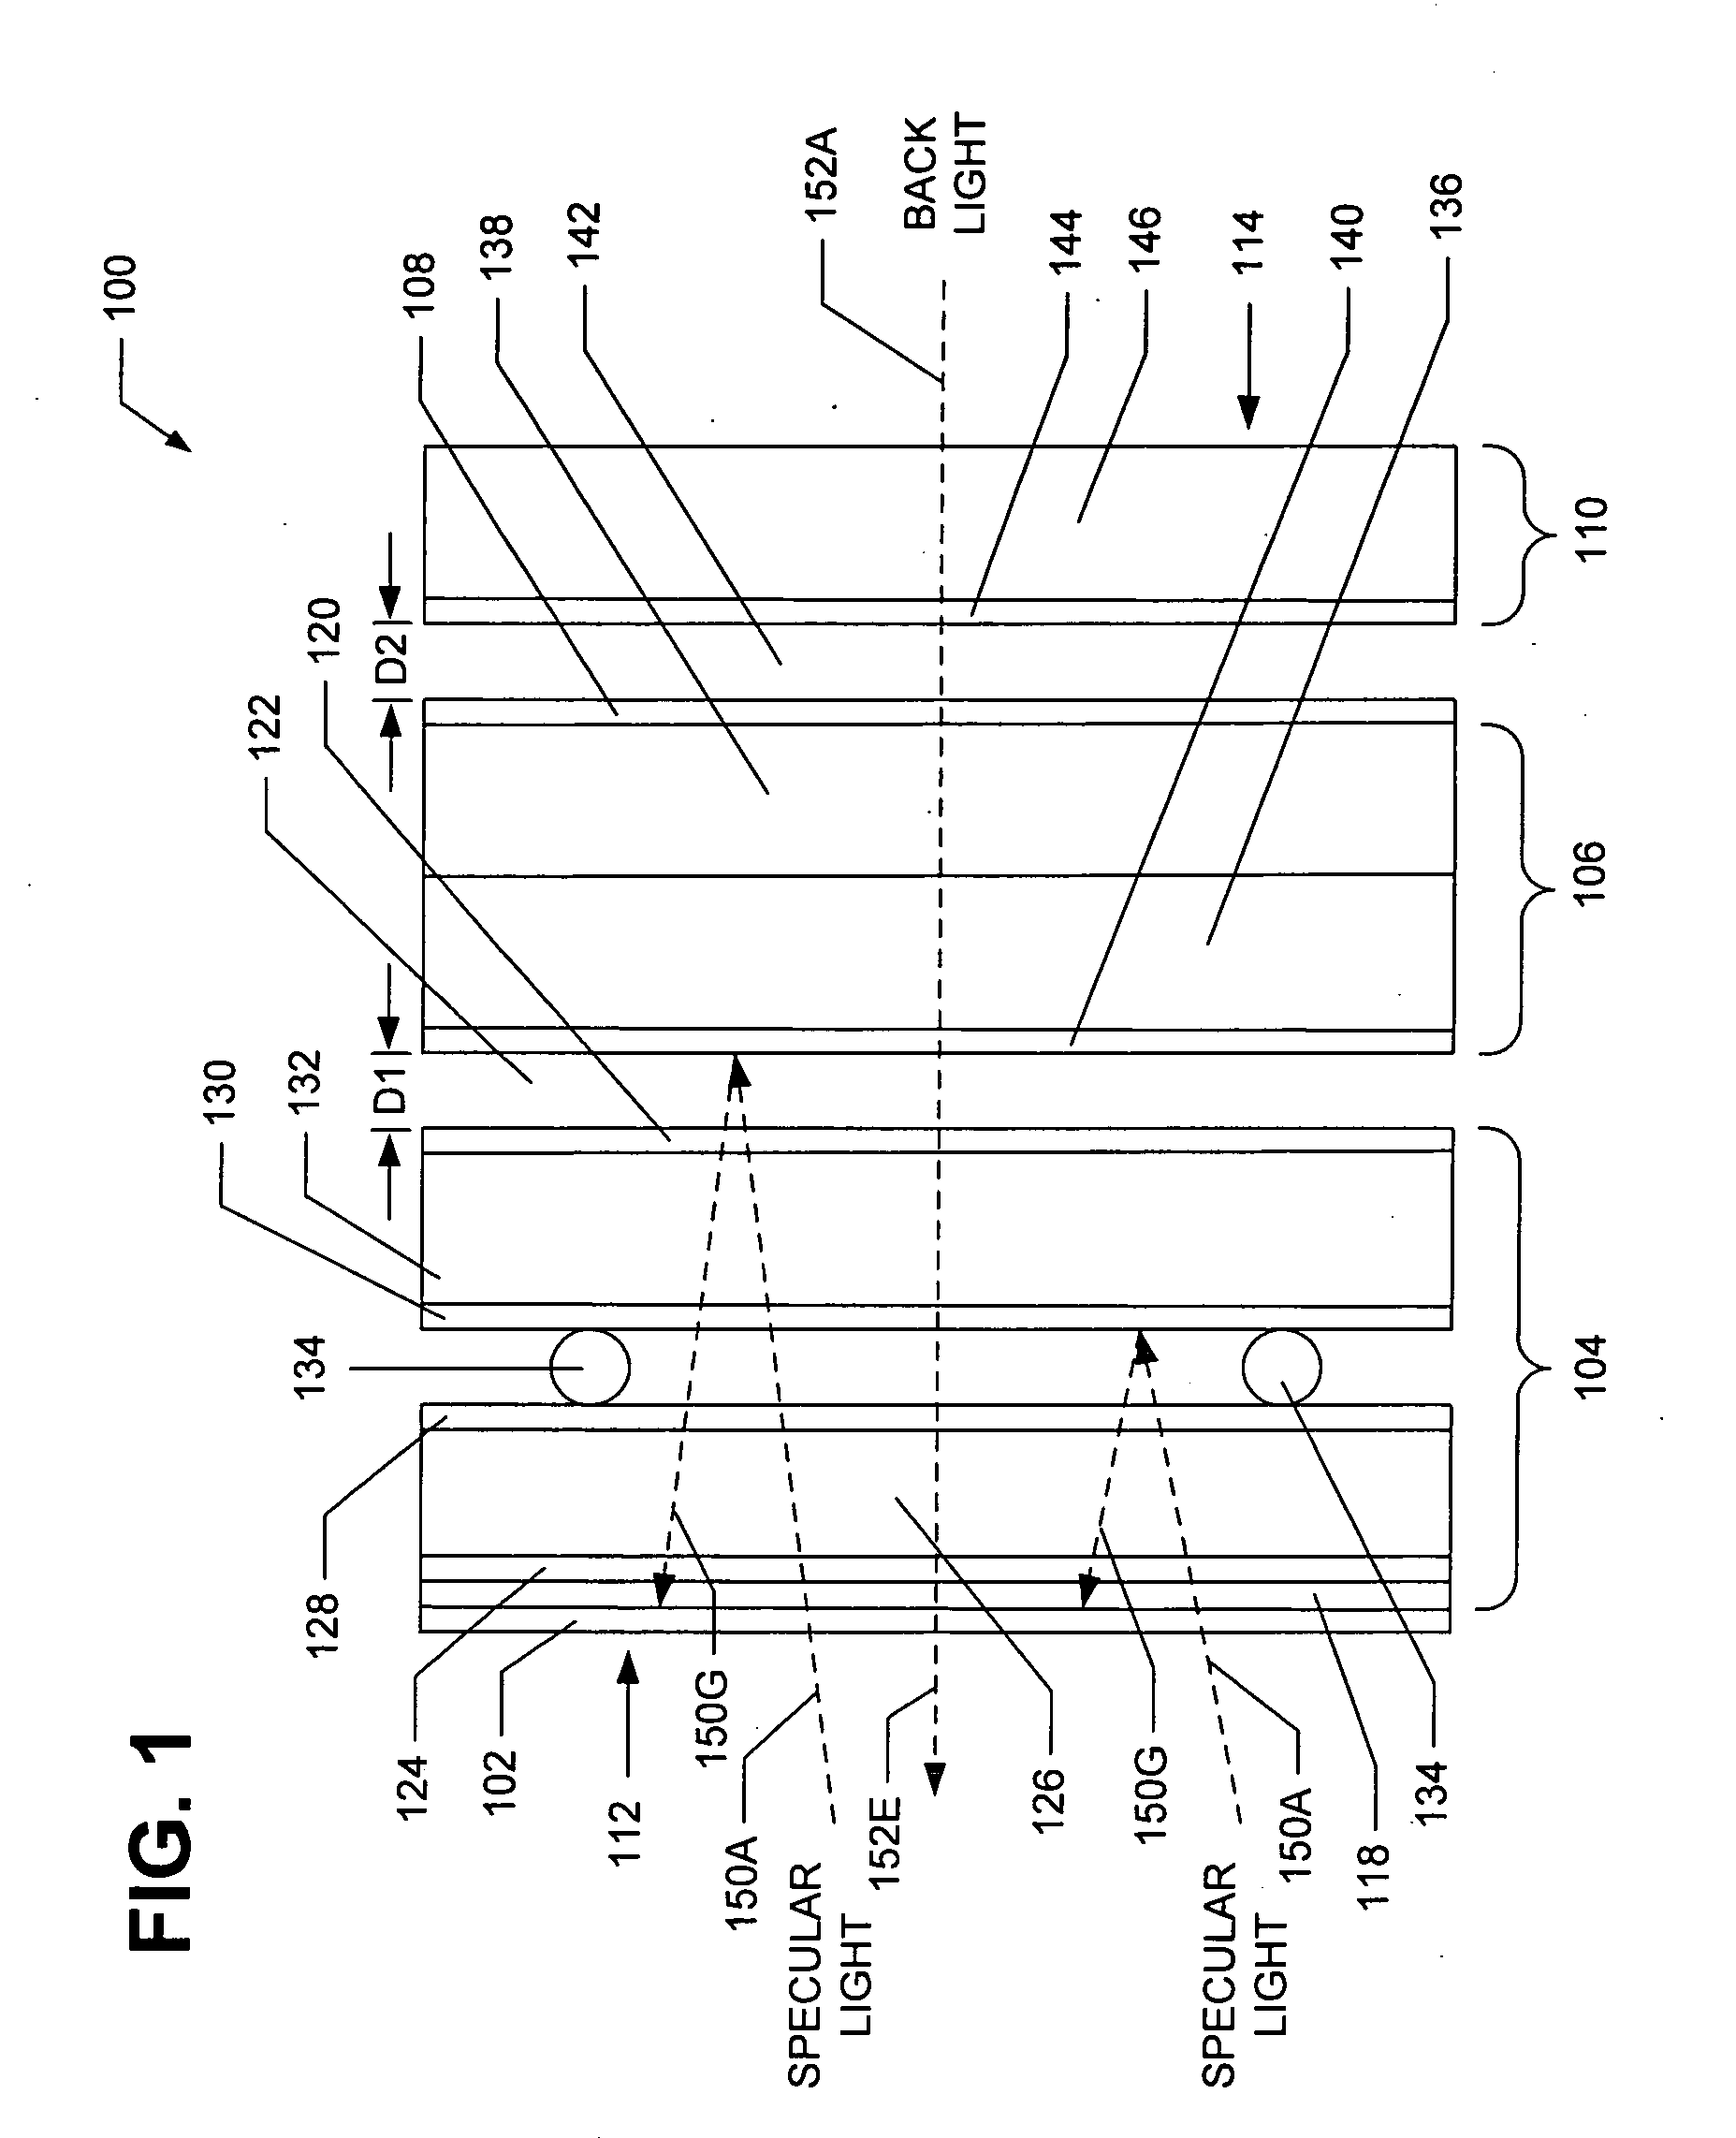 Optically enhanced flat panel display system having integral touch screen